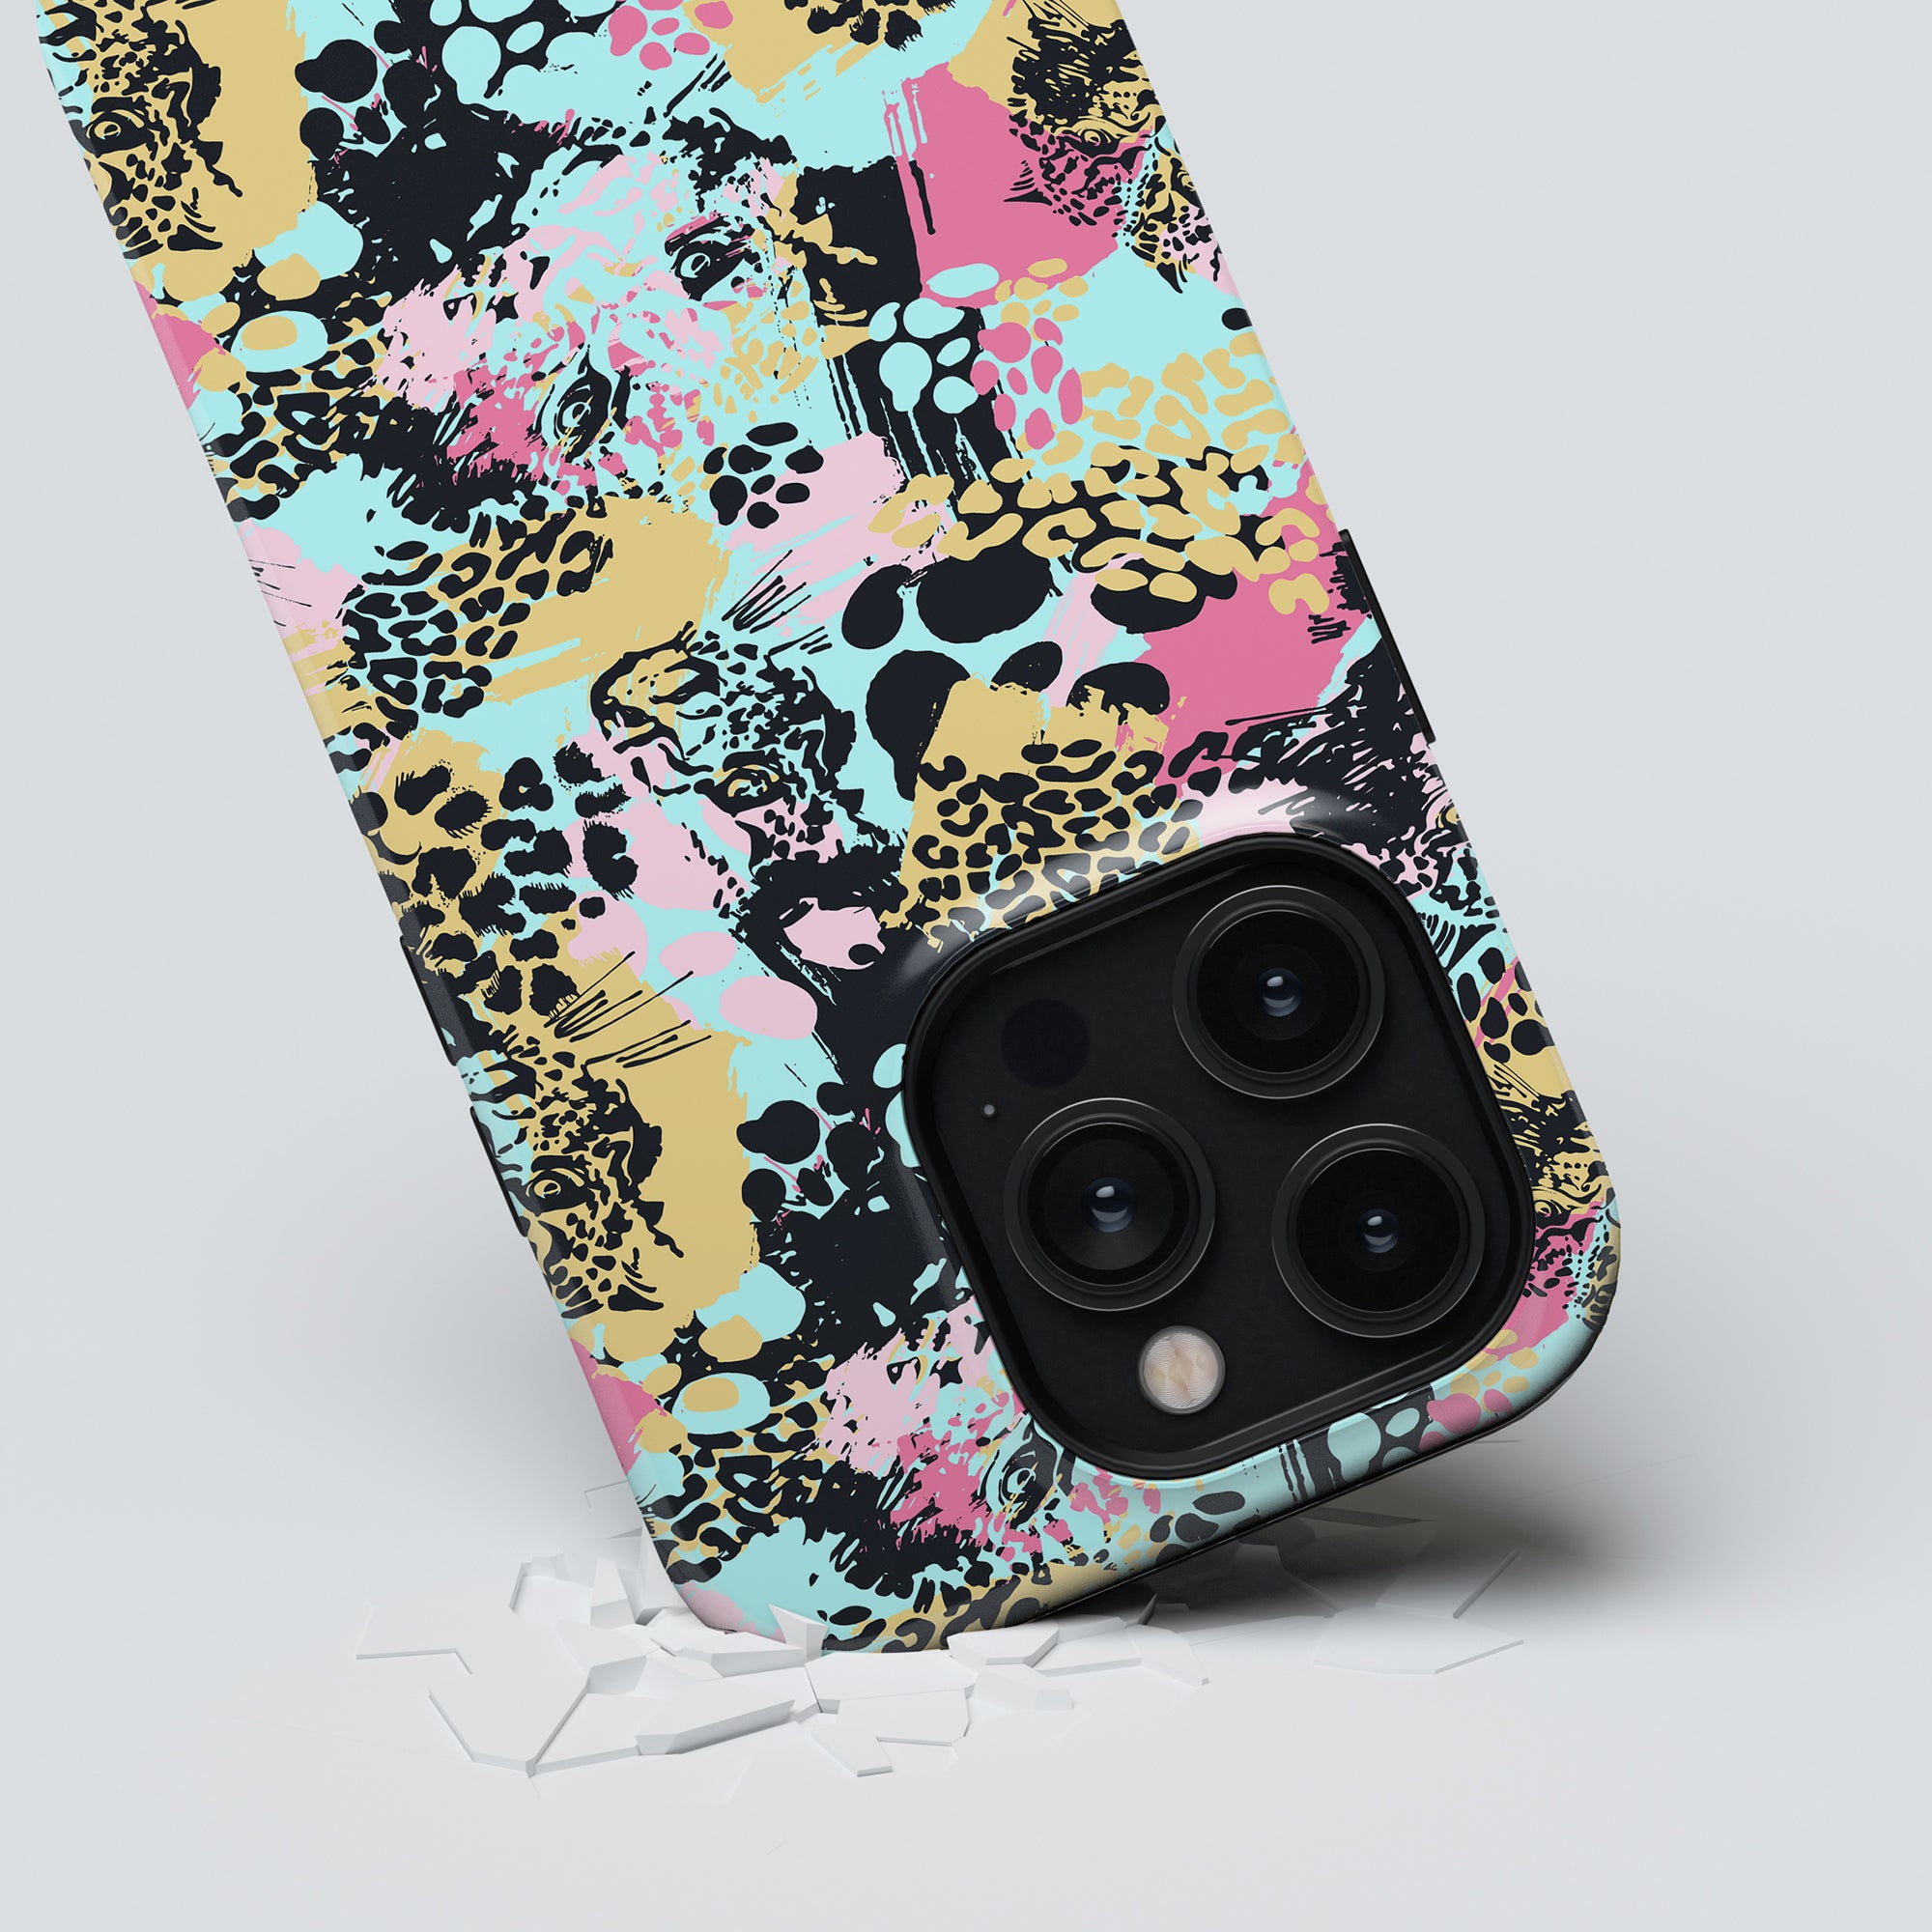 A smartphone with a leopard print and abstract colorful design on its Bite tough case, featuring a prominent triple-lens camera, partially peeling from a grey surface.